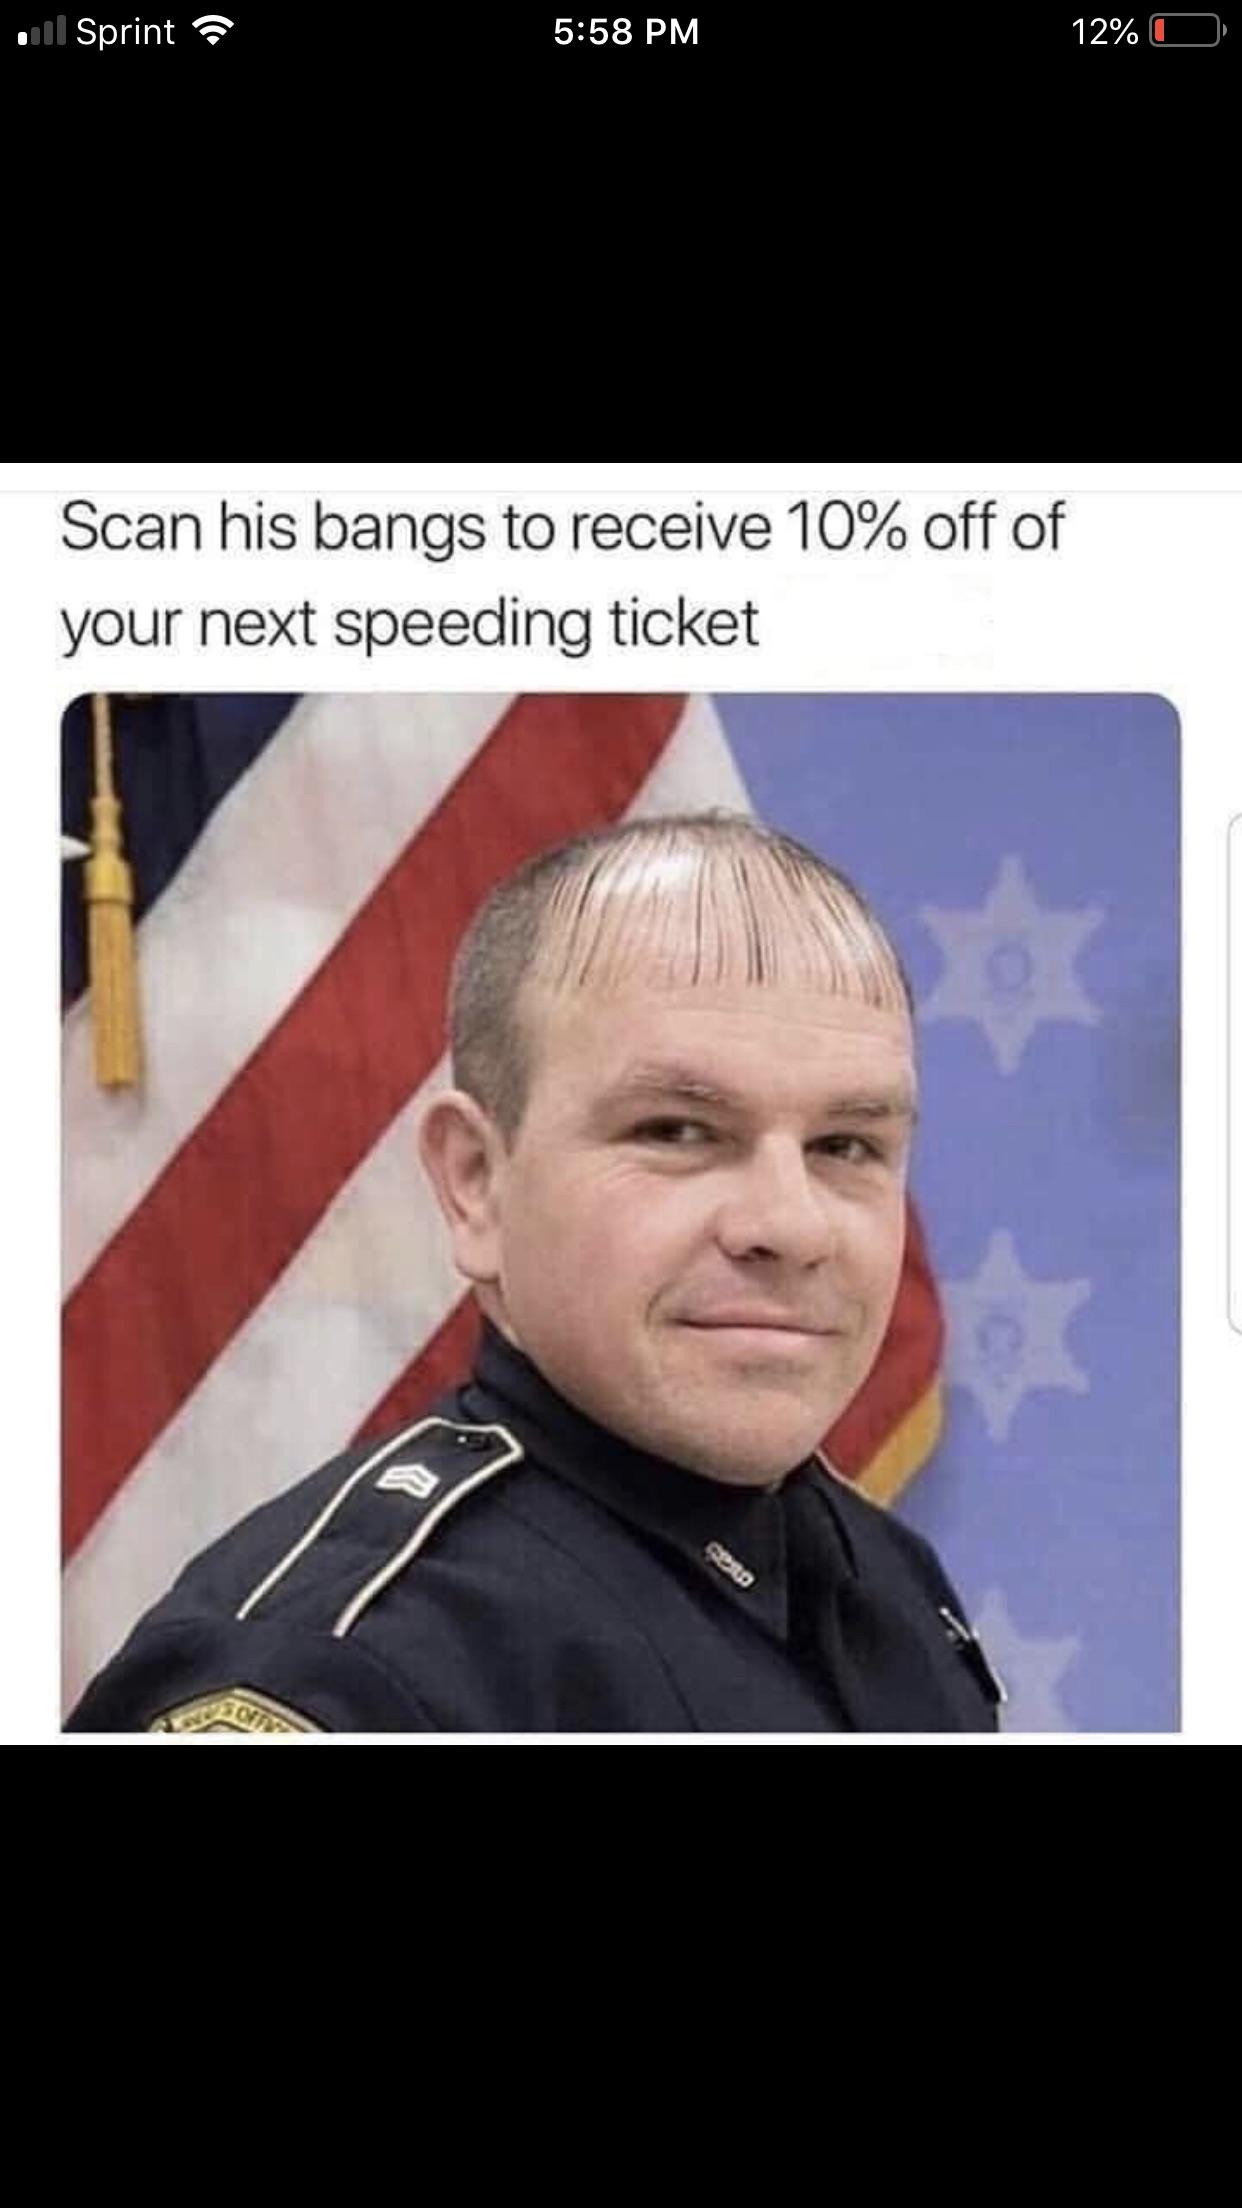 Officer Discount at your service. 